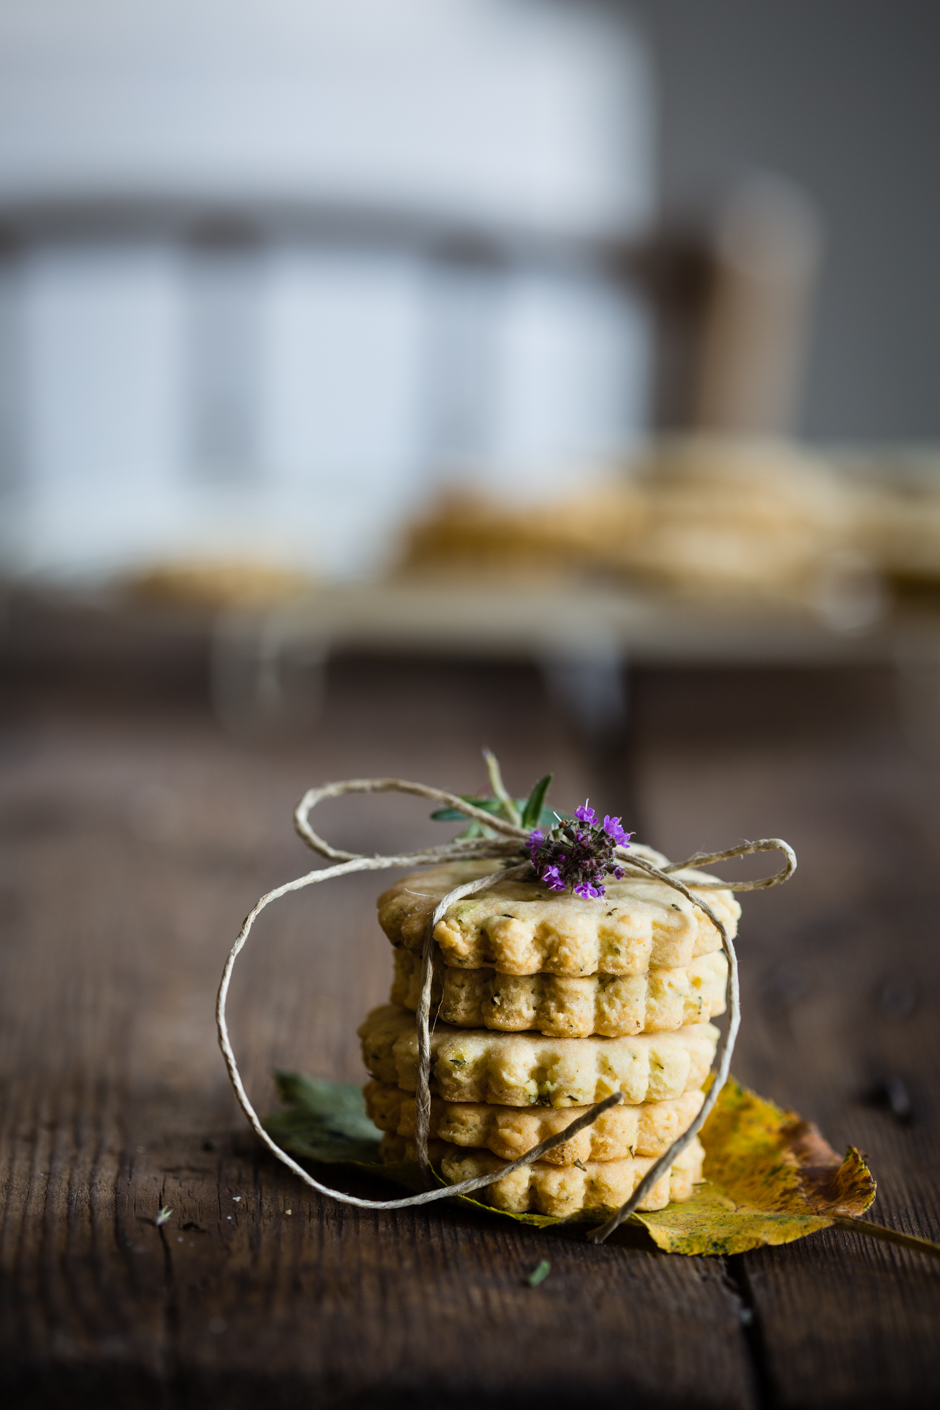 cheese-herb biscuits from the Taste of Memories Hungarian country kitchen www.tasteofmemories.com